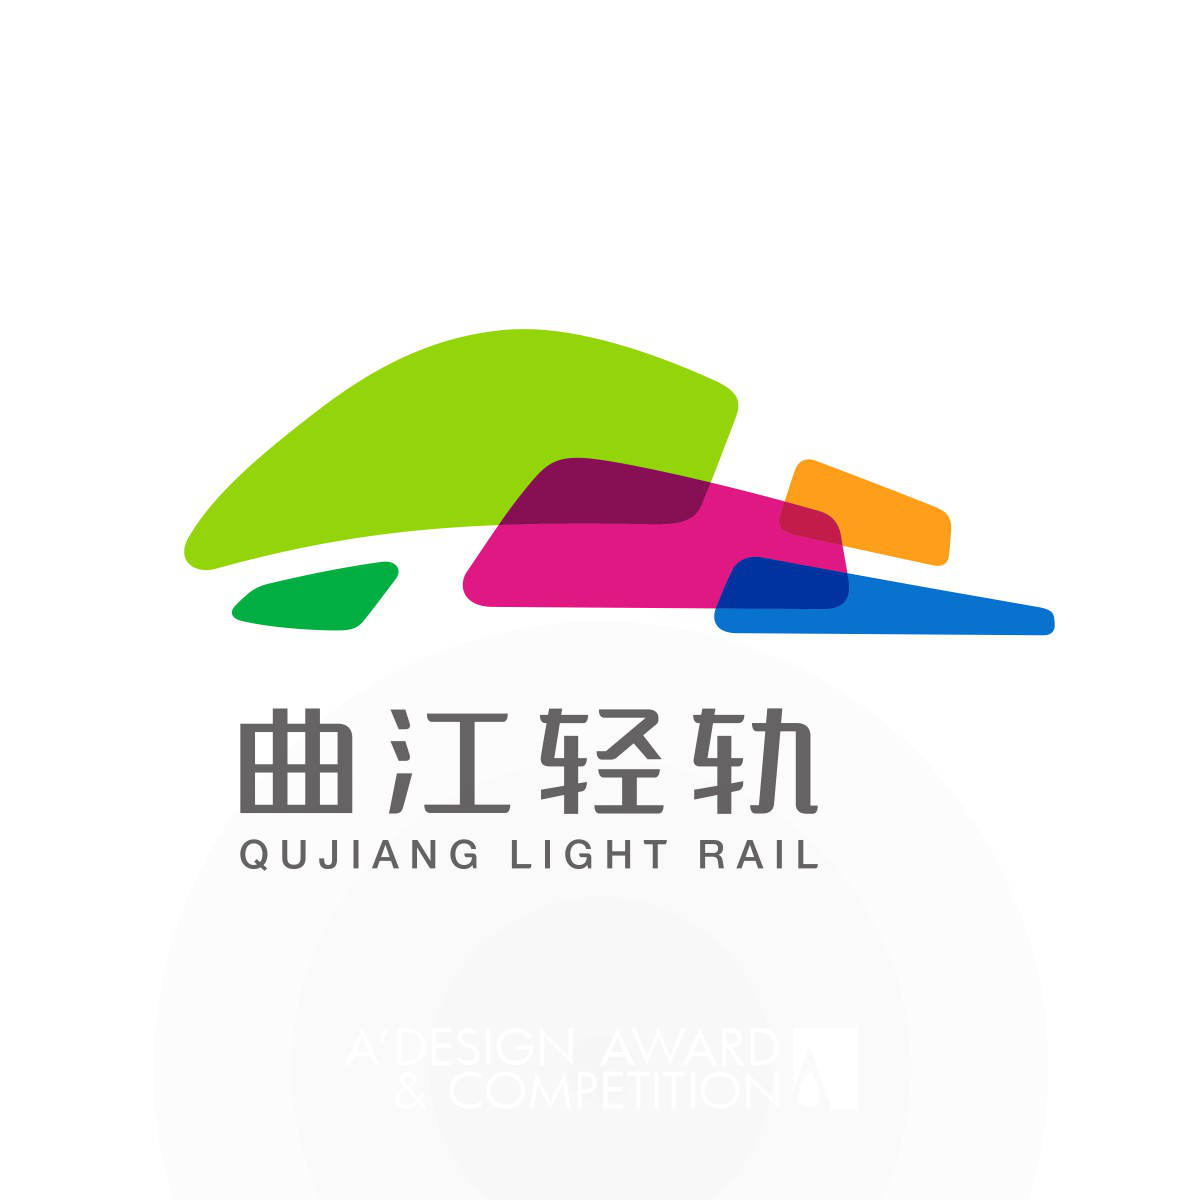 Yong Huang wins Bronze at the prestigious A' Graphics, Illustration and Visual Communication Design Award with Qujiang Light Rail Brand Design.